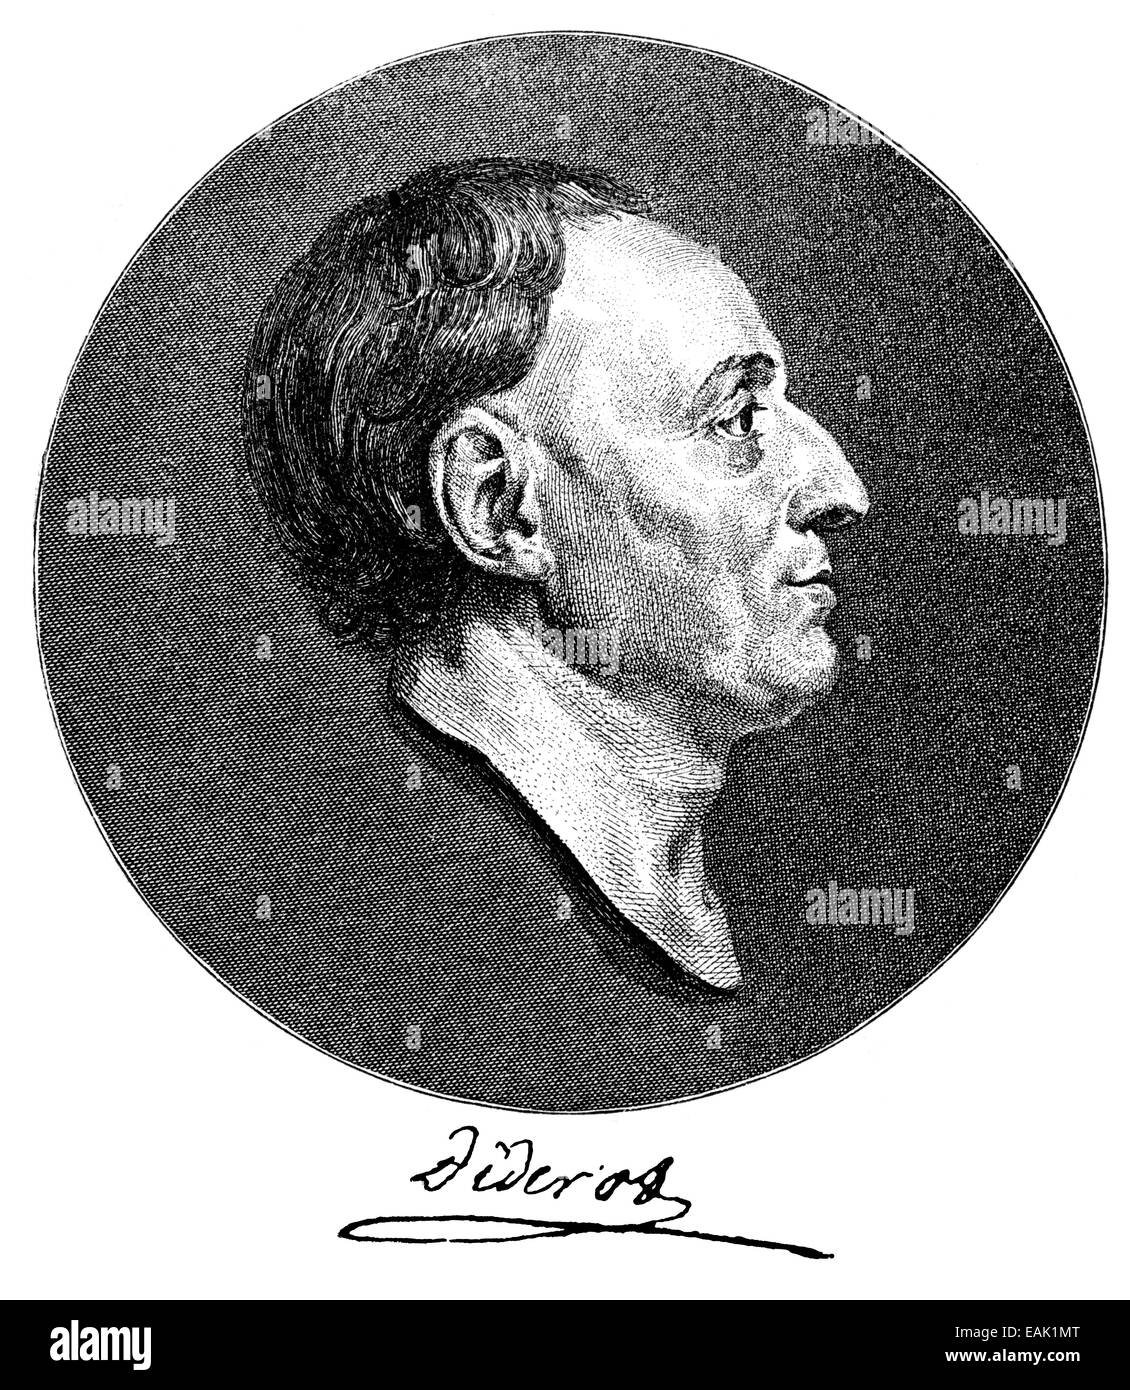 Denis Diderot, 1713 - 1784, a French writer, philosopher and Enlightenment philosopher, Denis Diderot, 1713 - 1784, ein französi Stock Photo